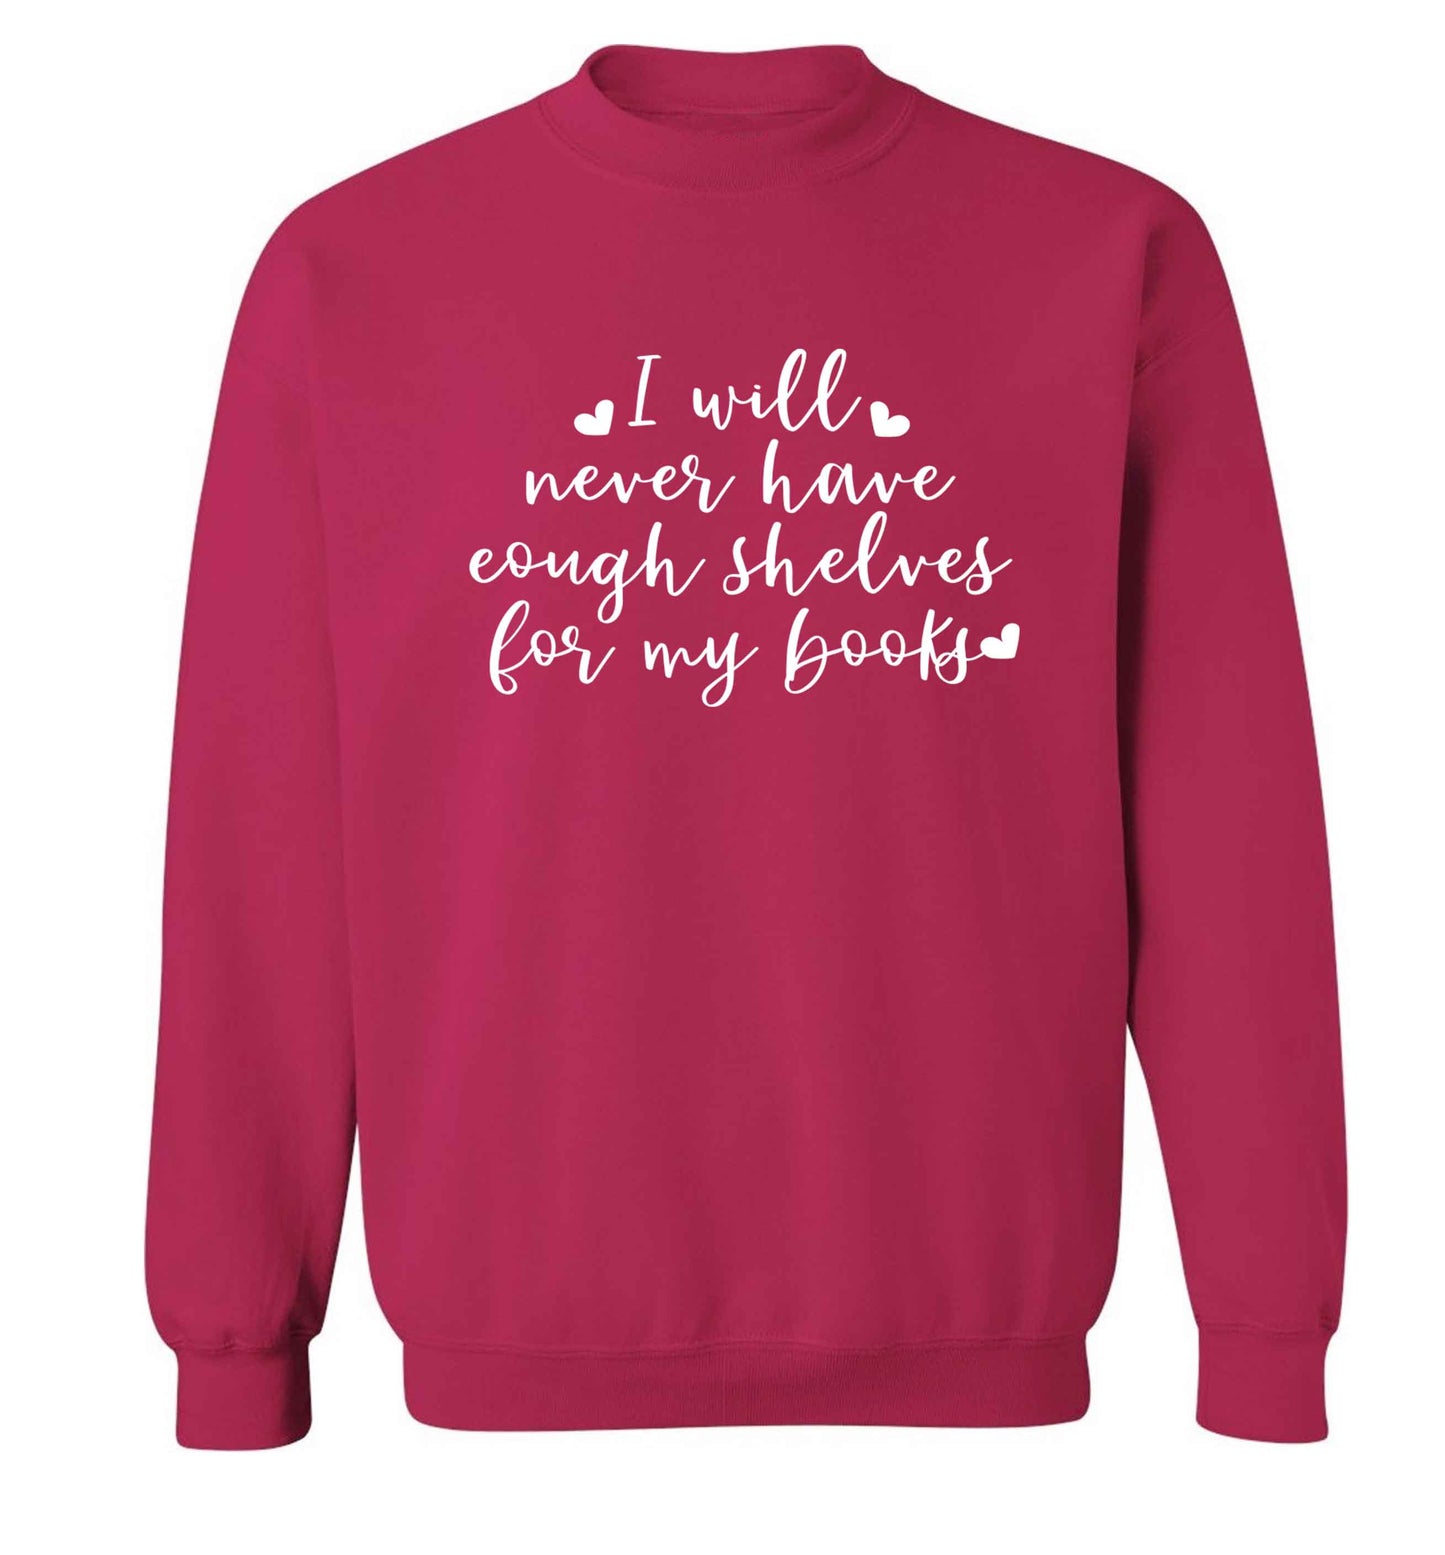 I will never have enough shelves for my books Adult's unisex pink Sweater 2XL